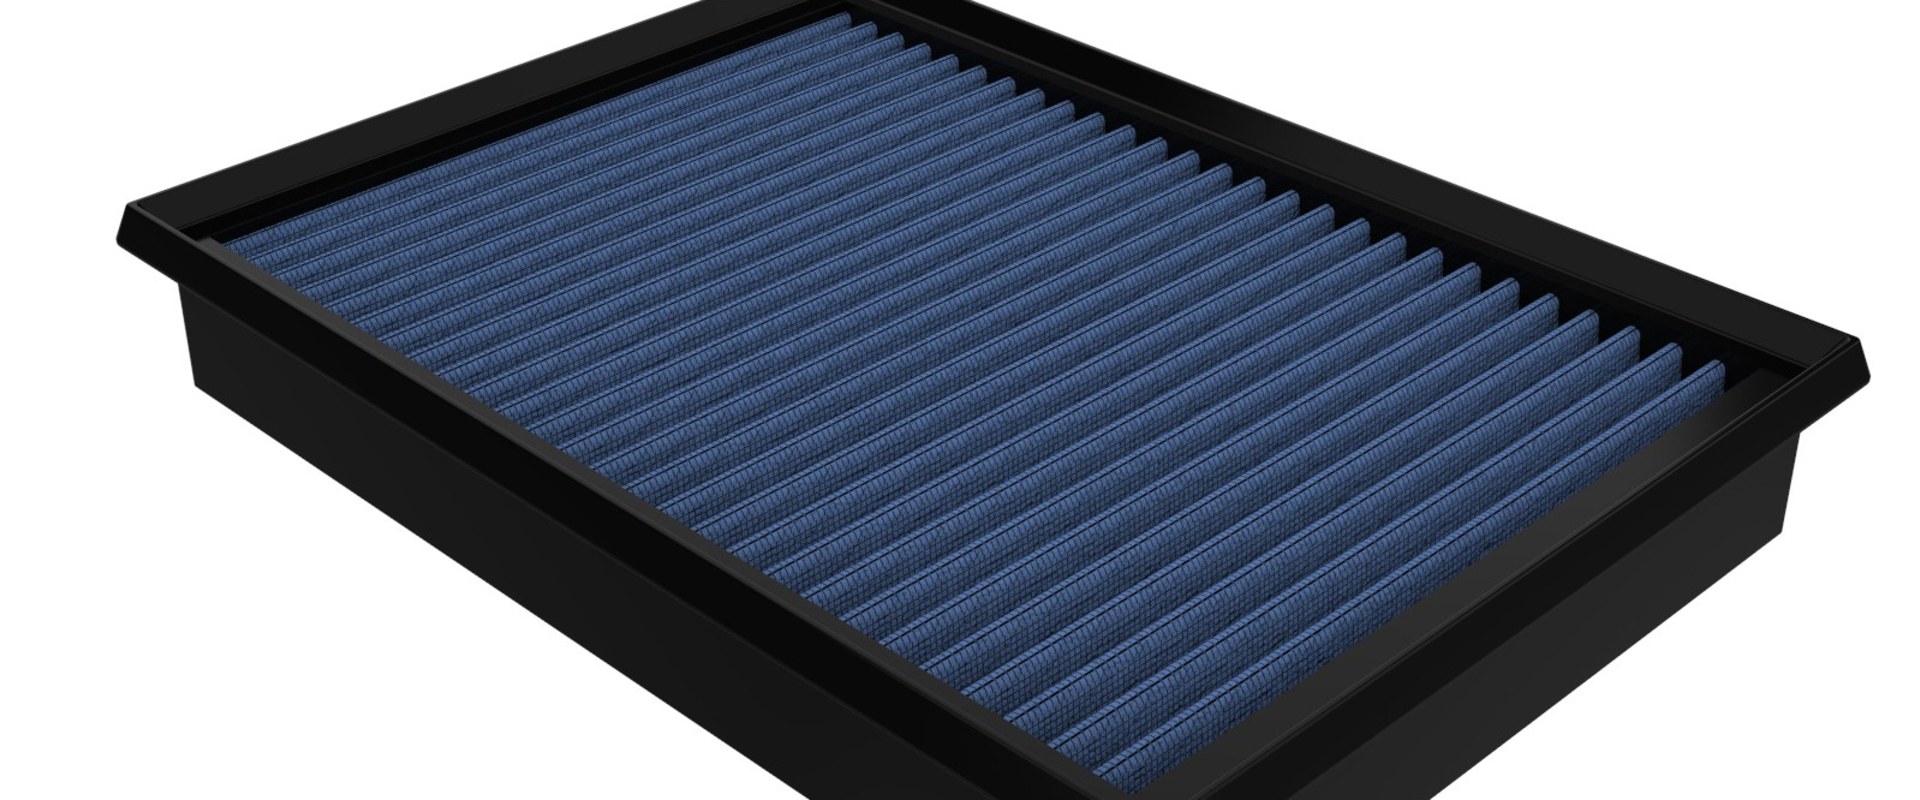 What is a 10x30x1 Air Filter and How Does it Work?